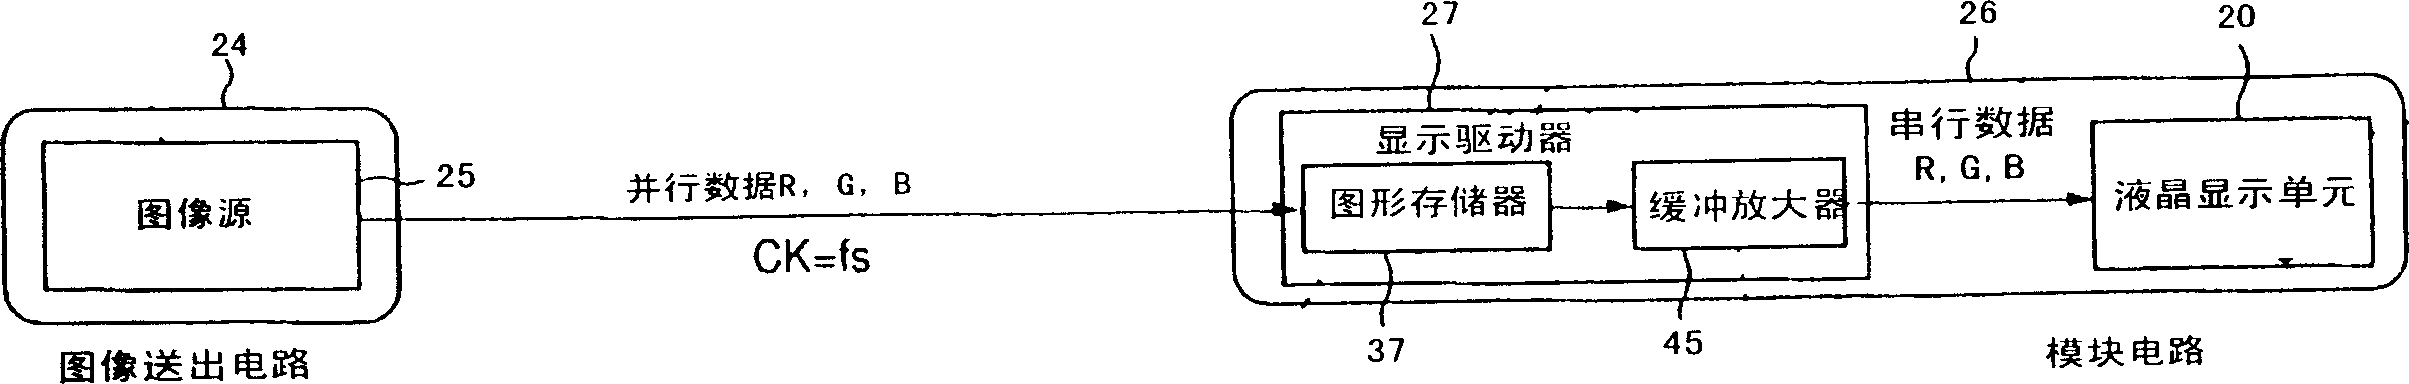 Field-sequential liquid crystal display device and driving method